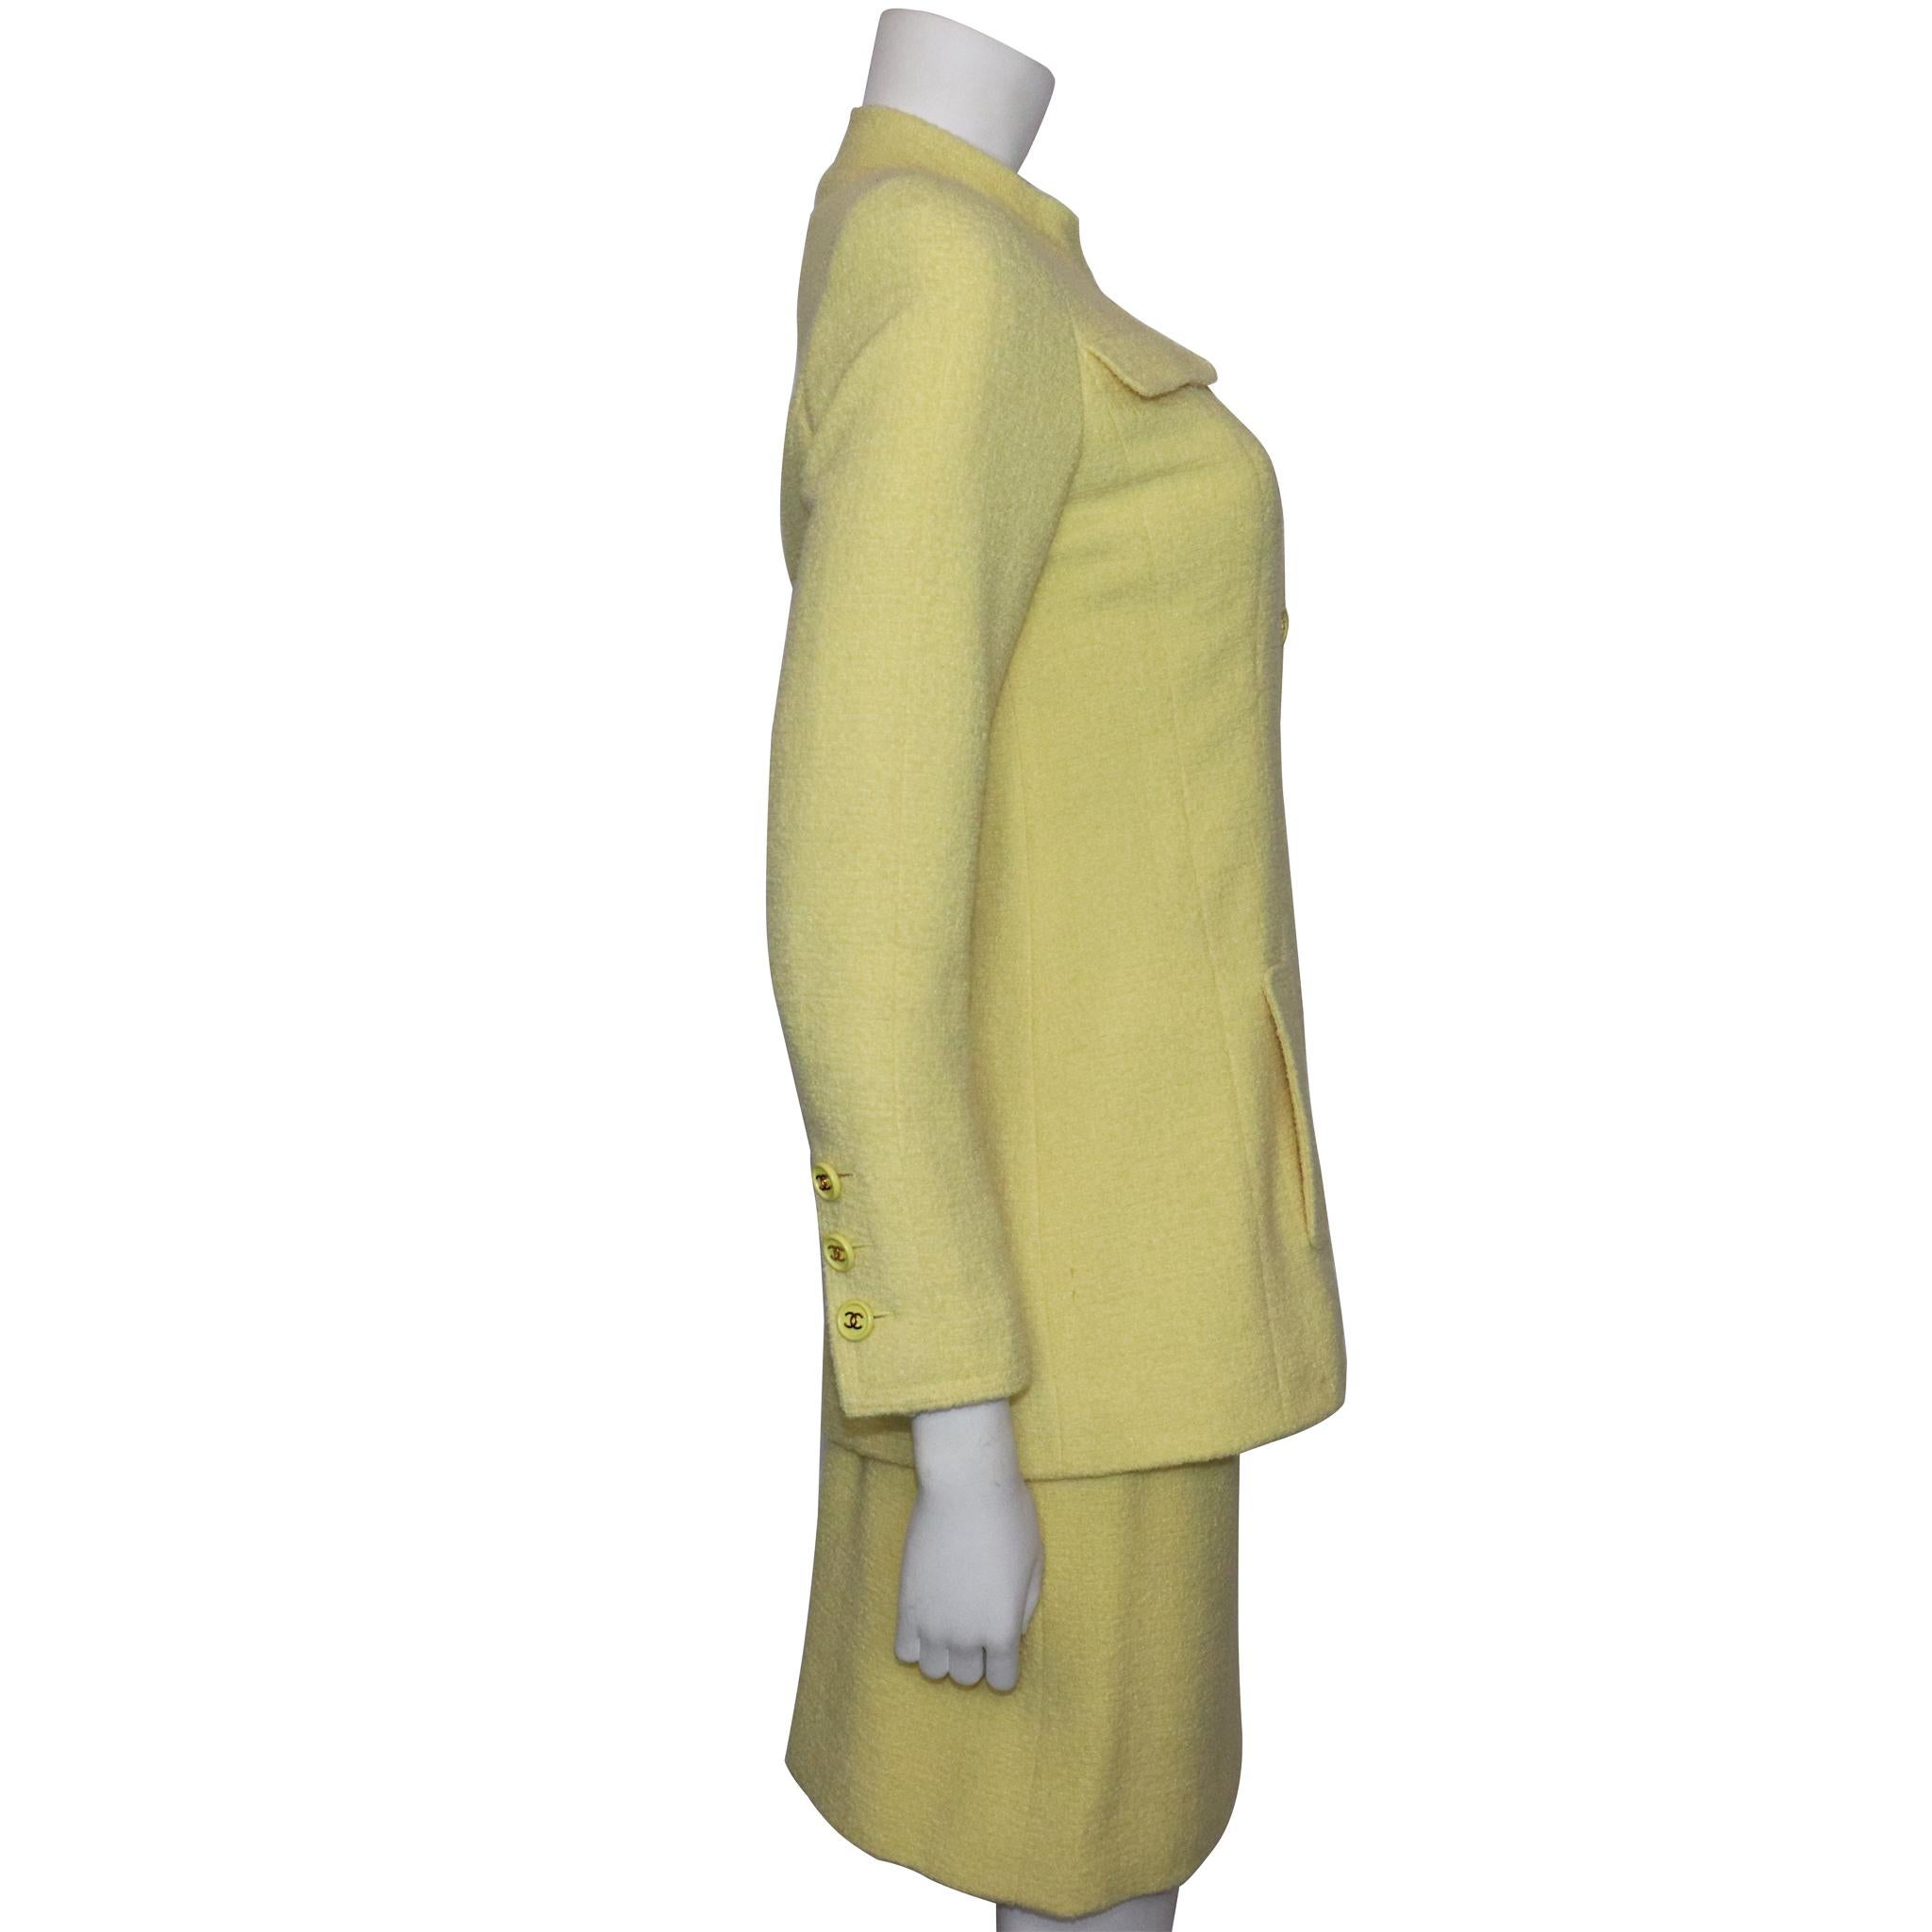 Chanel 2PC Yellow Skirt Suit w/  Mandarin Collar Circa 1990s. In excellent condition 
Fabric: Laine Wool 
Measurements-

Size 36 
Bust: 36 Inches
Waist: 28 Inches
Hip: 36 Inches
Arm Length: 23 Inches
Jacket Length: 28 Inches
Skirt Length: 20 Inches